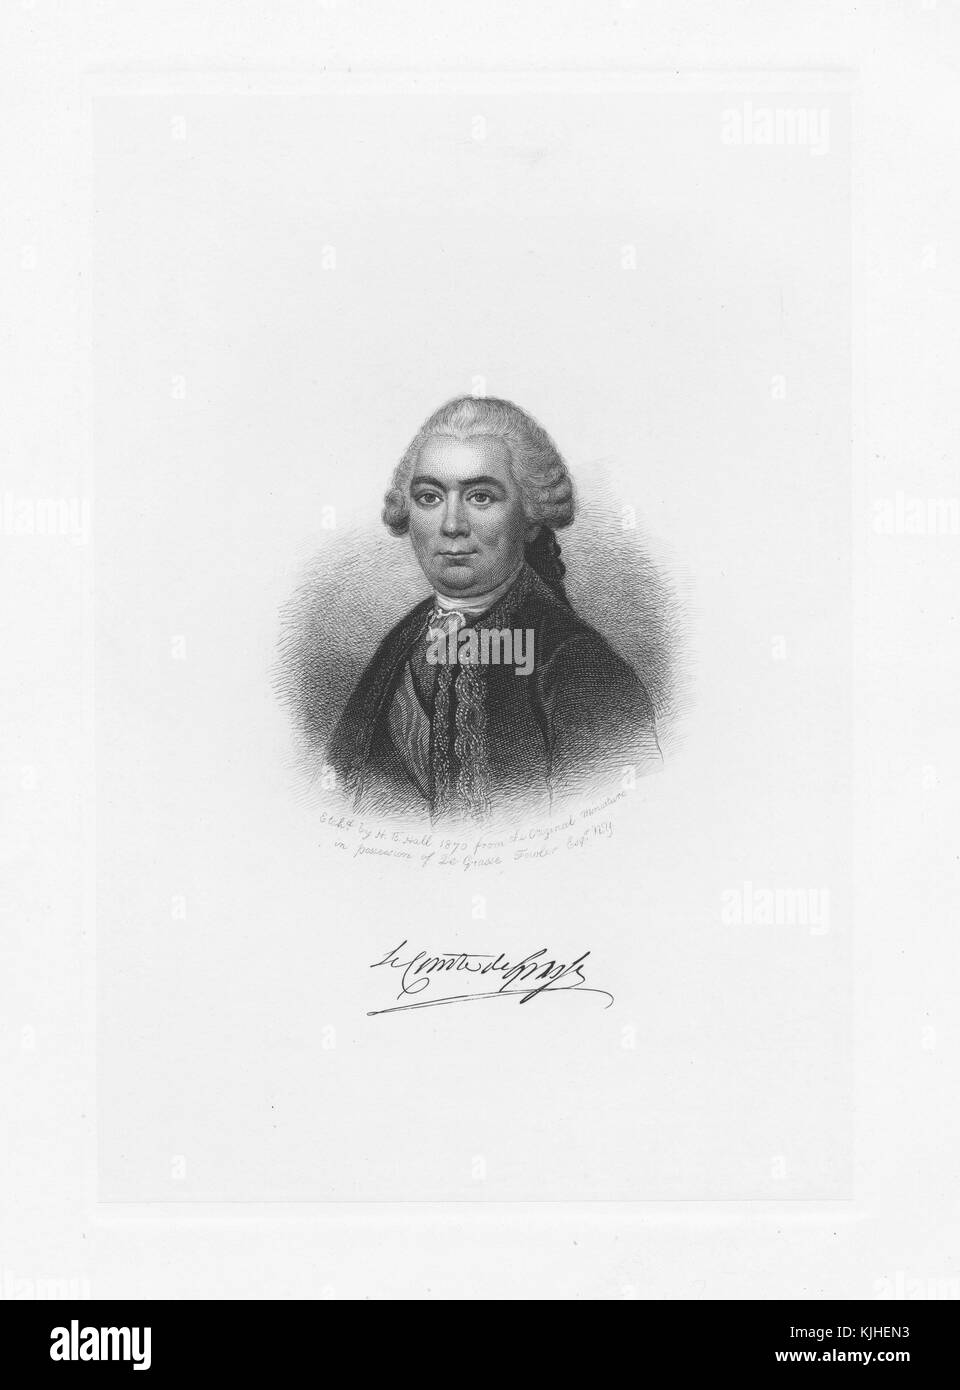 Etched portrait of Francois Joseph Paul de Grasse, also known as Comte de Grasse, a French admiral best known for his command of the French fleet at the Battle of the Chesapeake, which led directly to the British surrender at Yorktown, his signature copied at the bottom, 1870. From the New York Public Library. Stock Photo